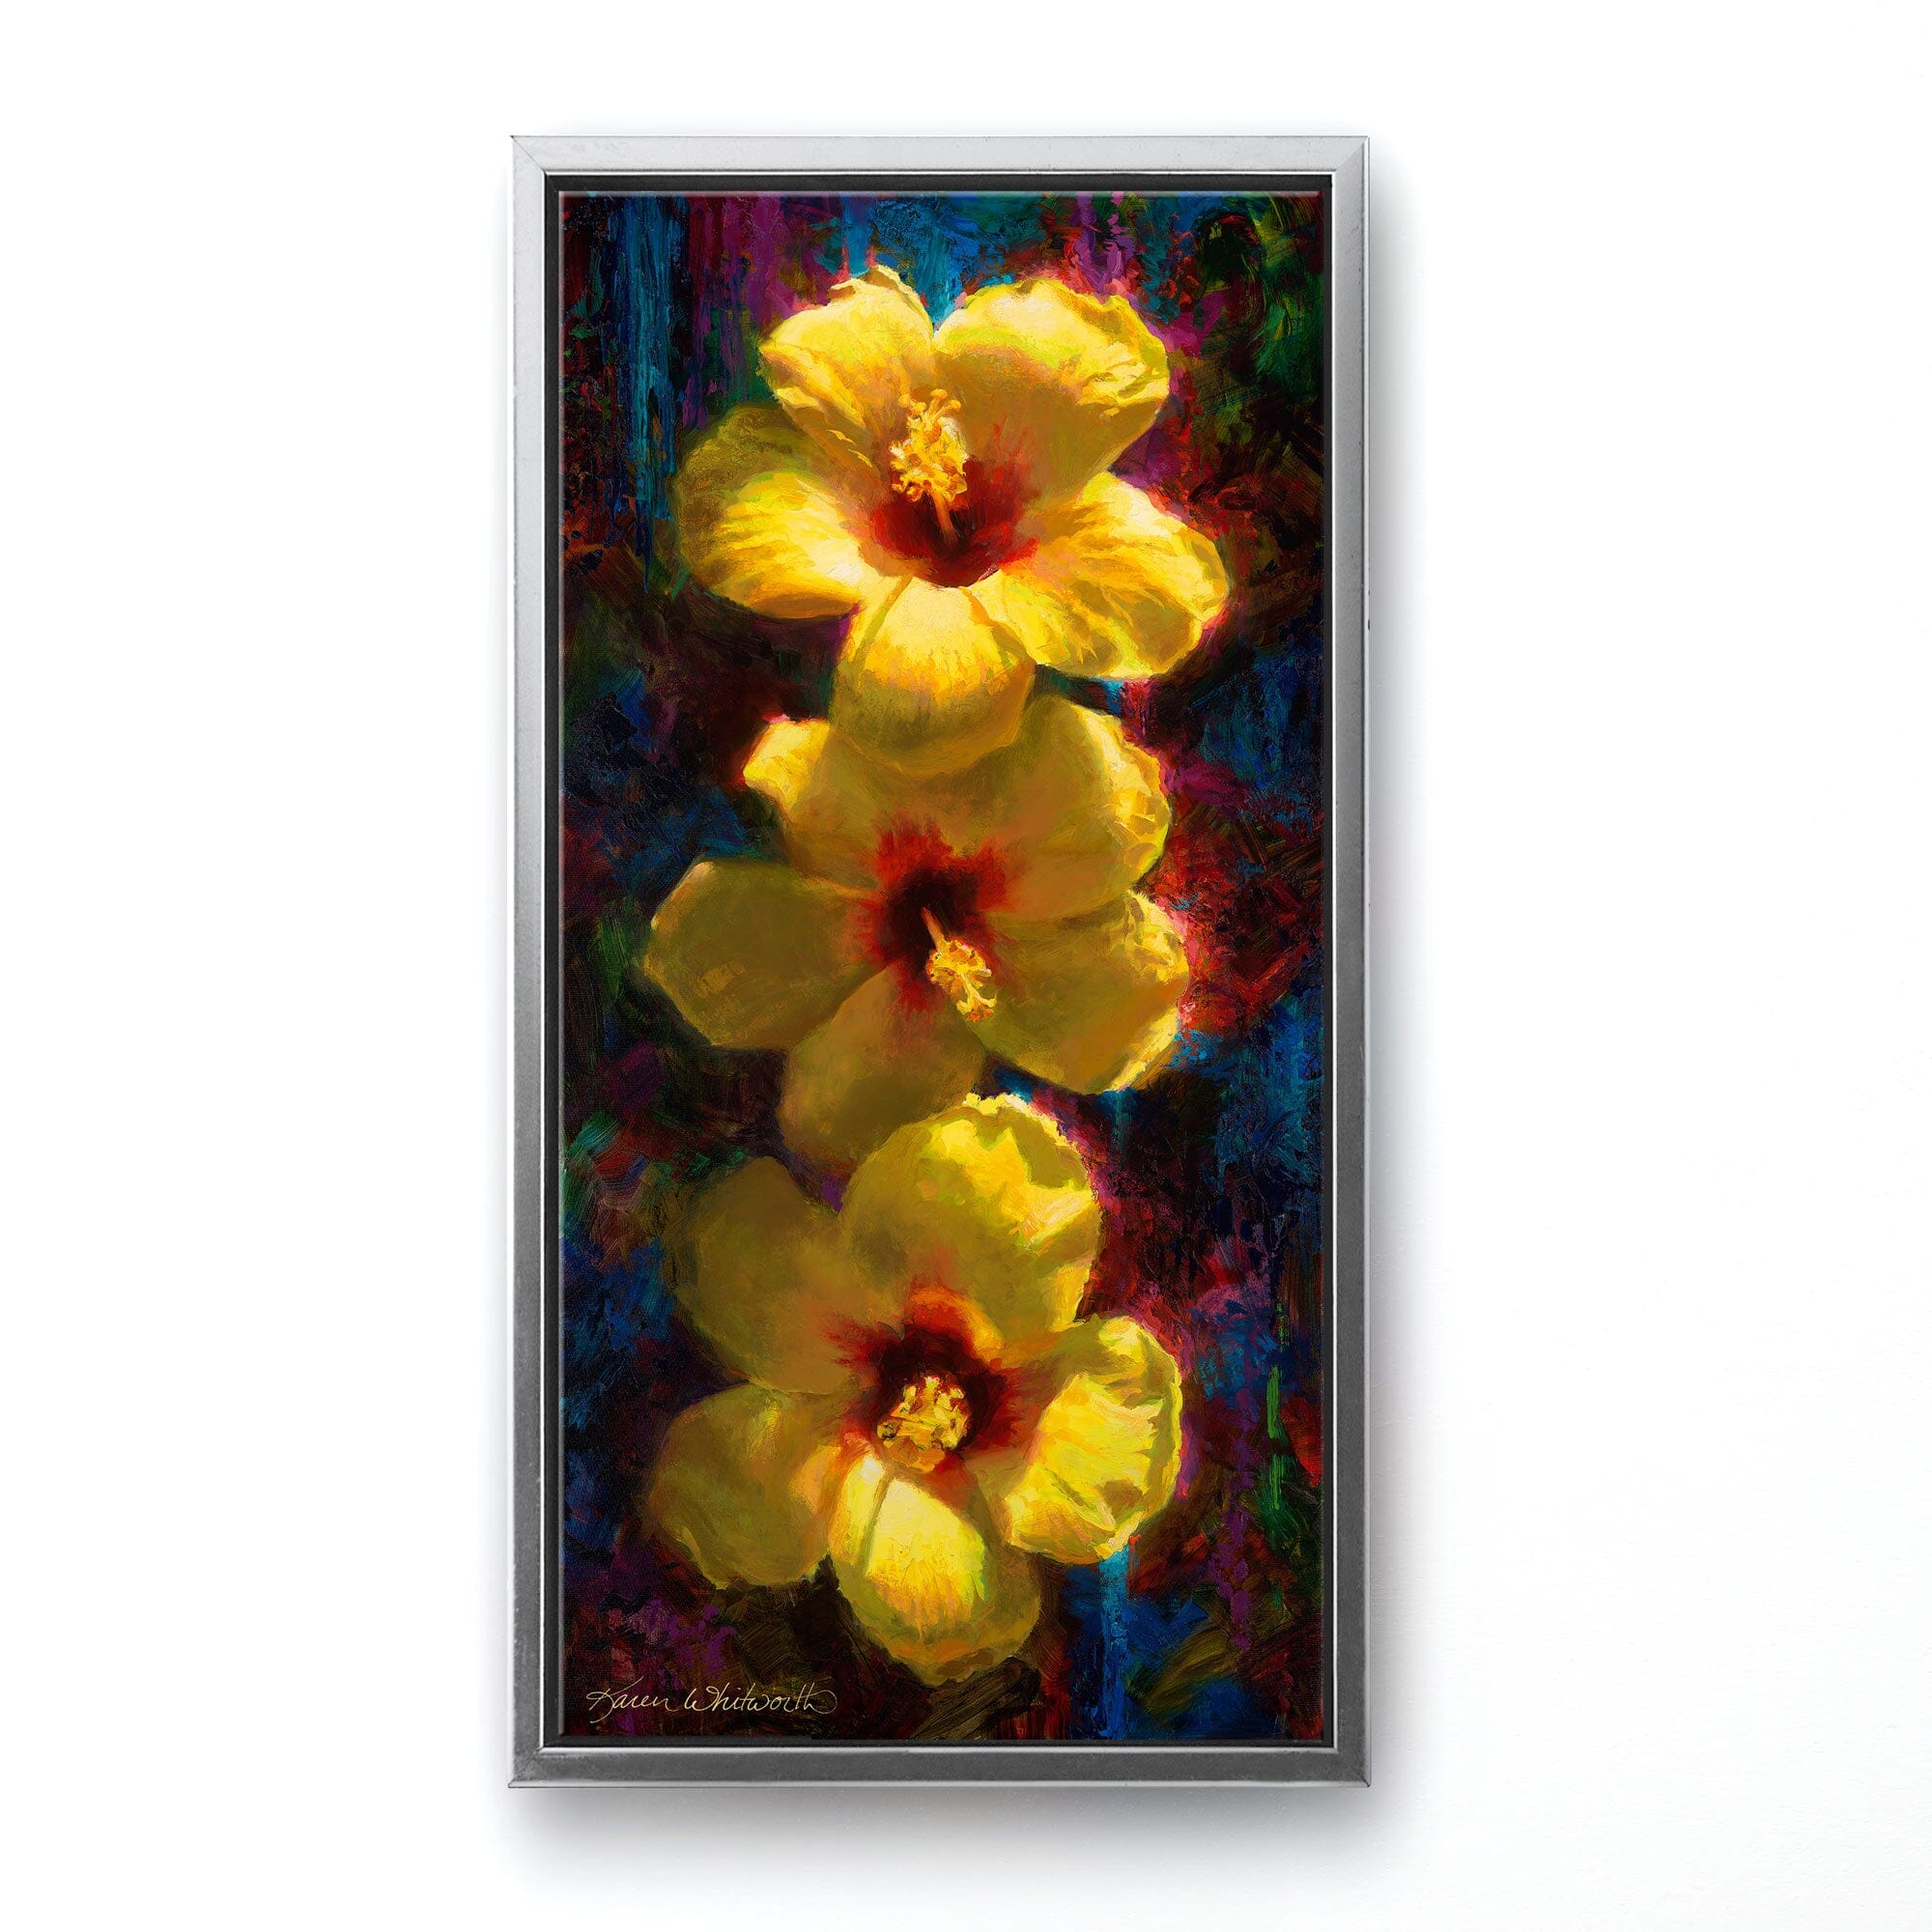 Vertical floral painting of tropical hibiscus flowers by artist Karen Whitworth. The 3 bright yellow flowers sit one on top of the other illuminated in sunlight against a dark background. The painting is framed in a sleek silver contemporary frame and hanging on a white wall. 